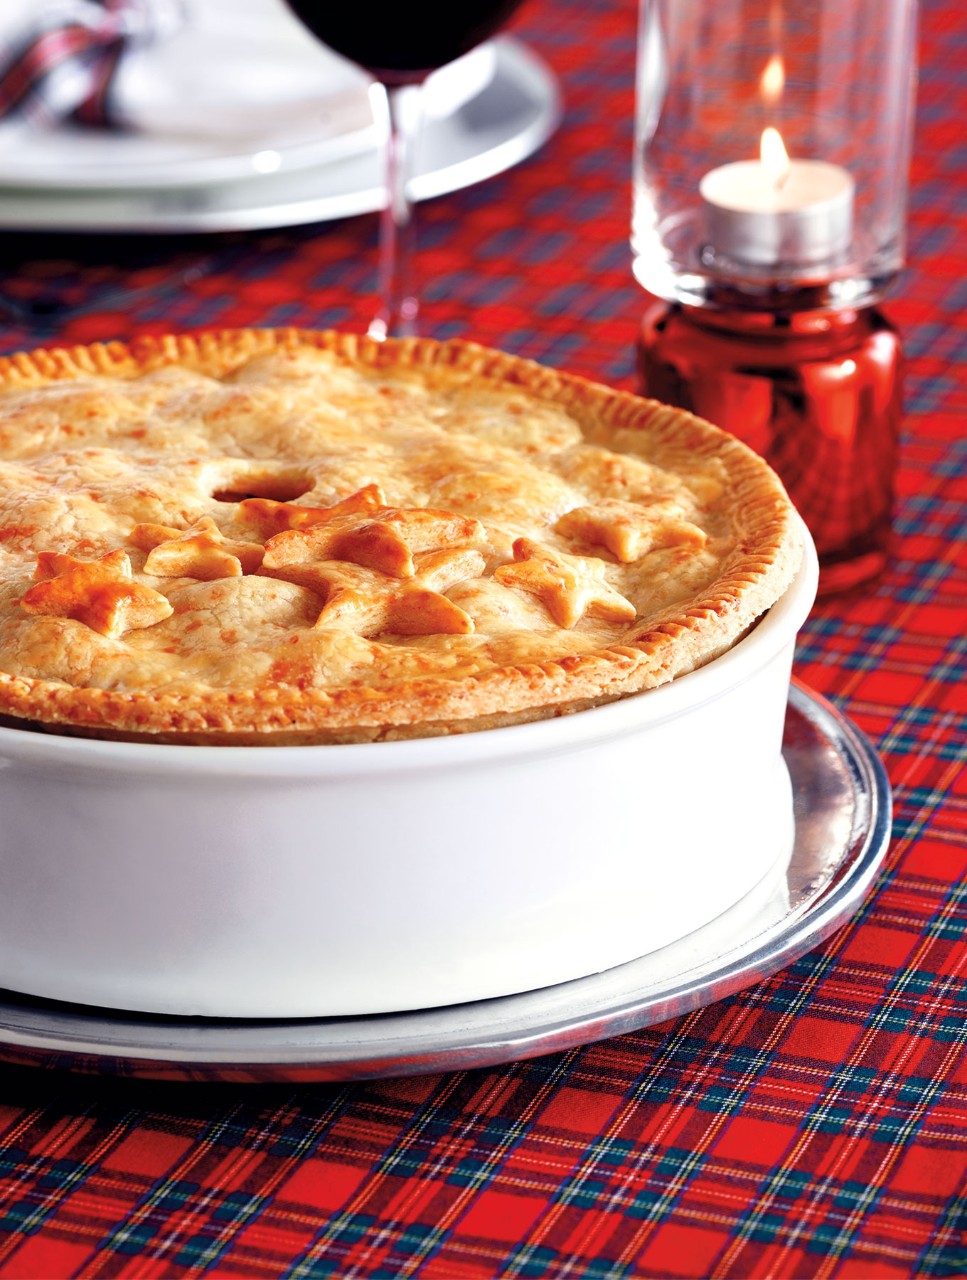 Rich Beef Pot Pie with a Cheddar Crust